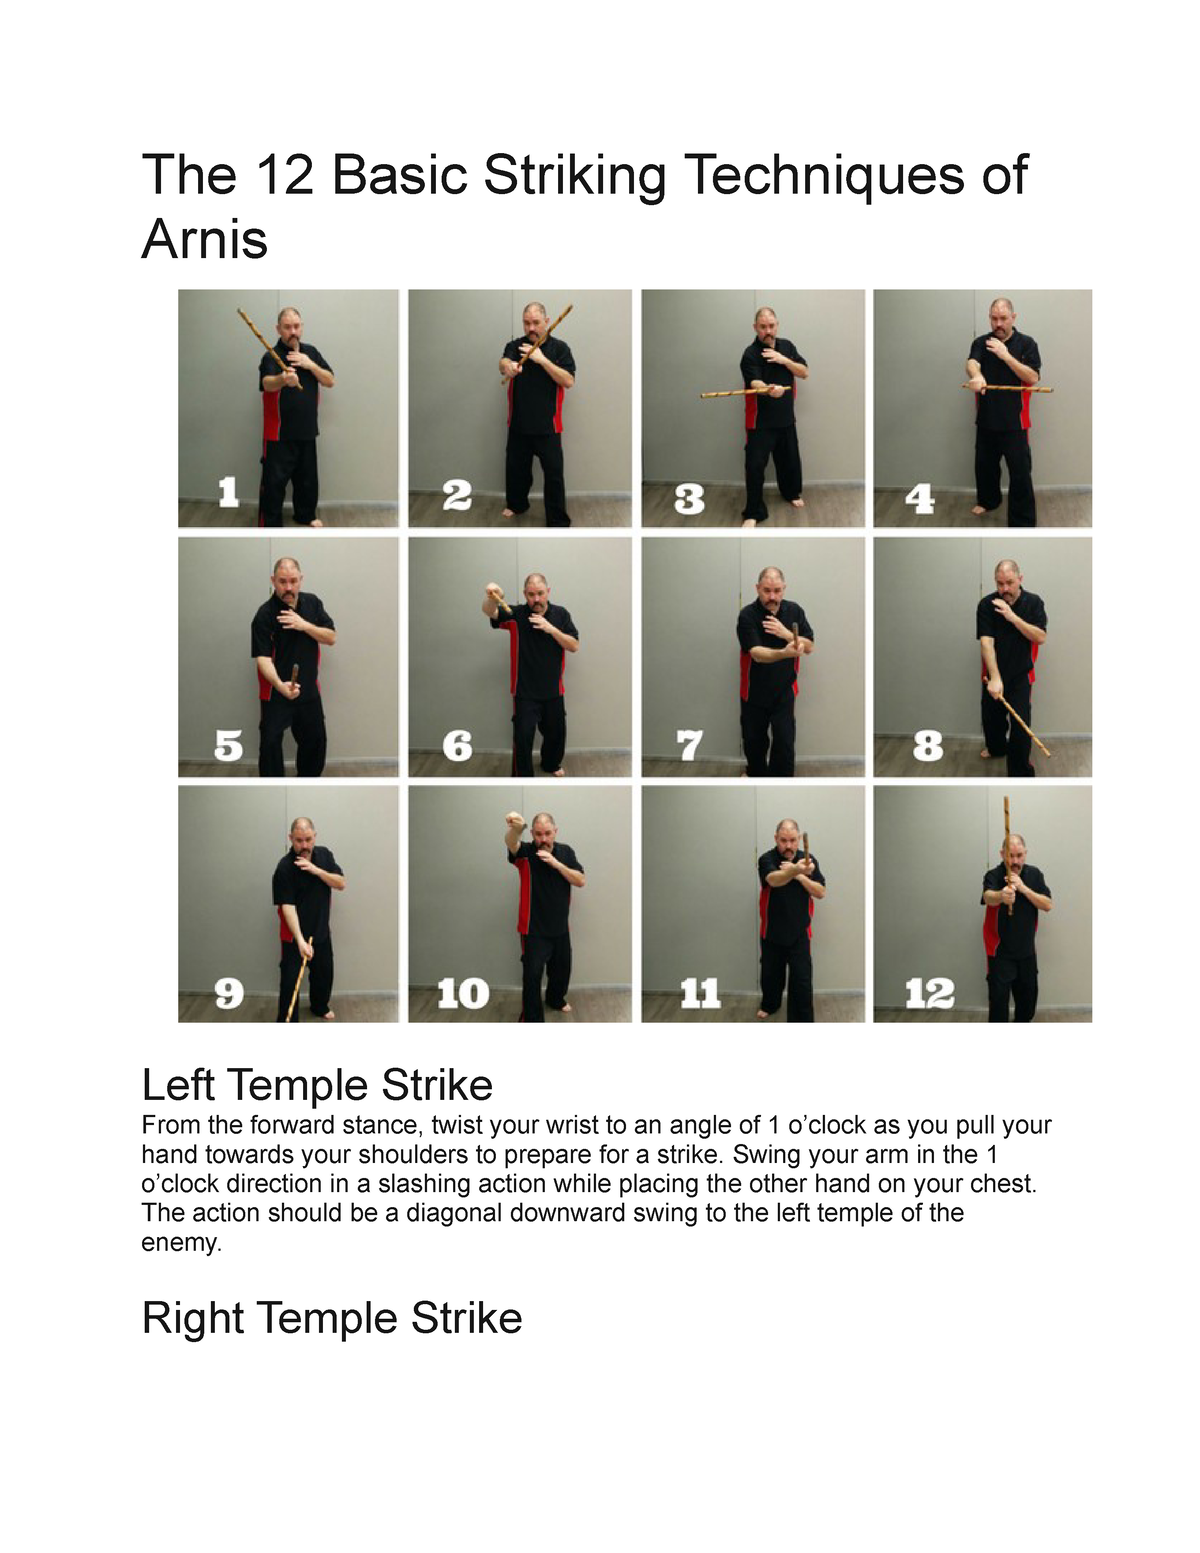 make an essay on the importance of arnis training